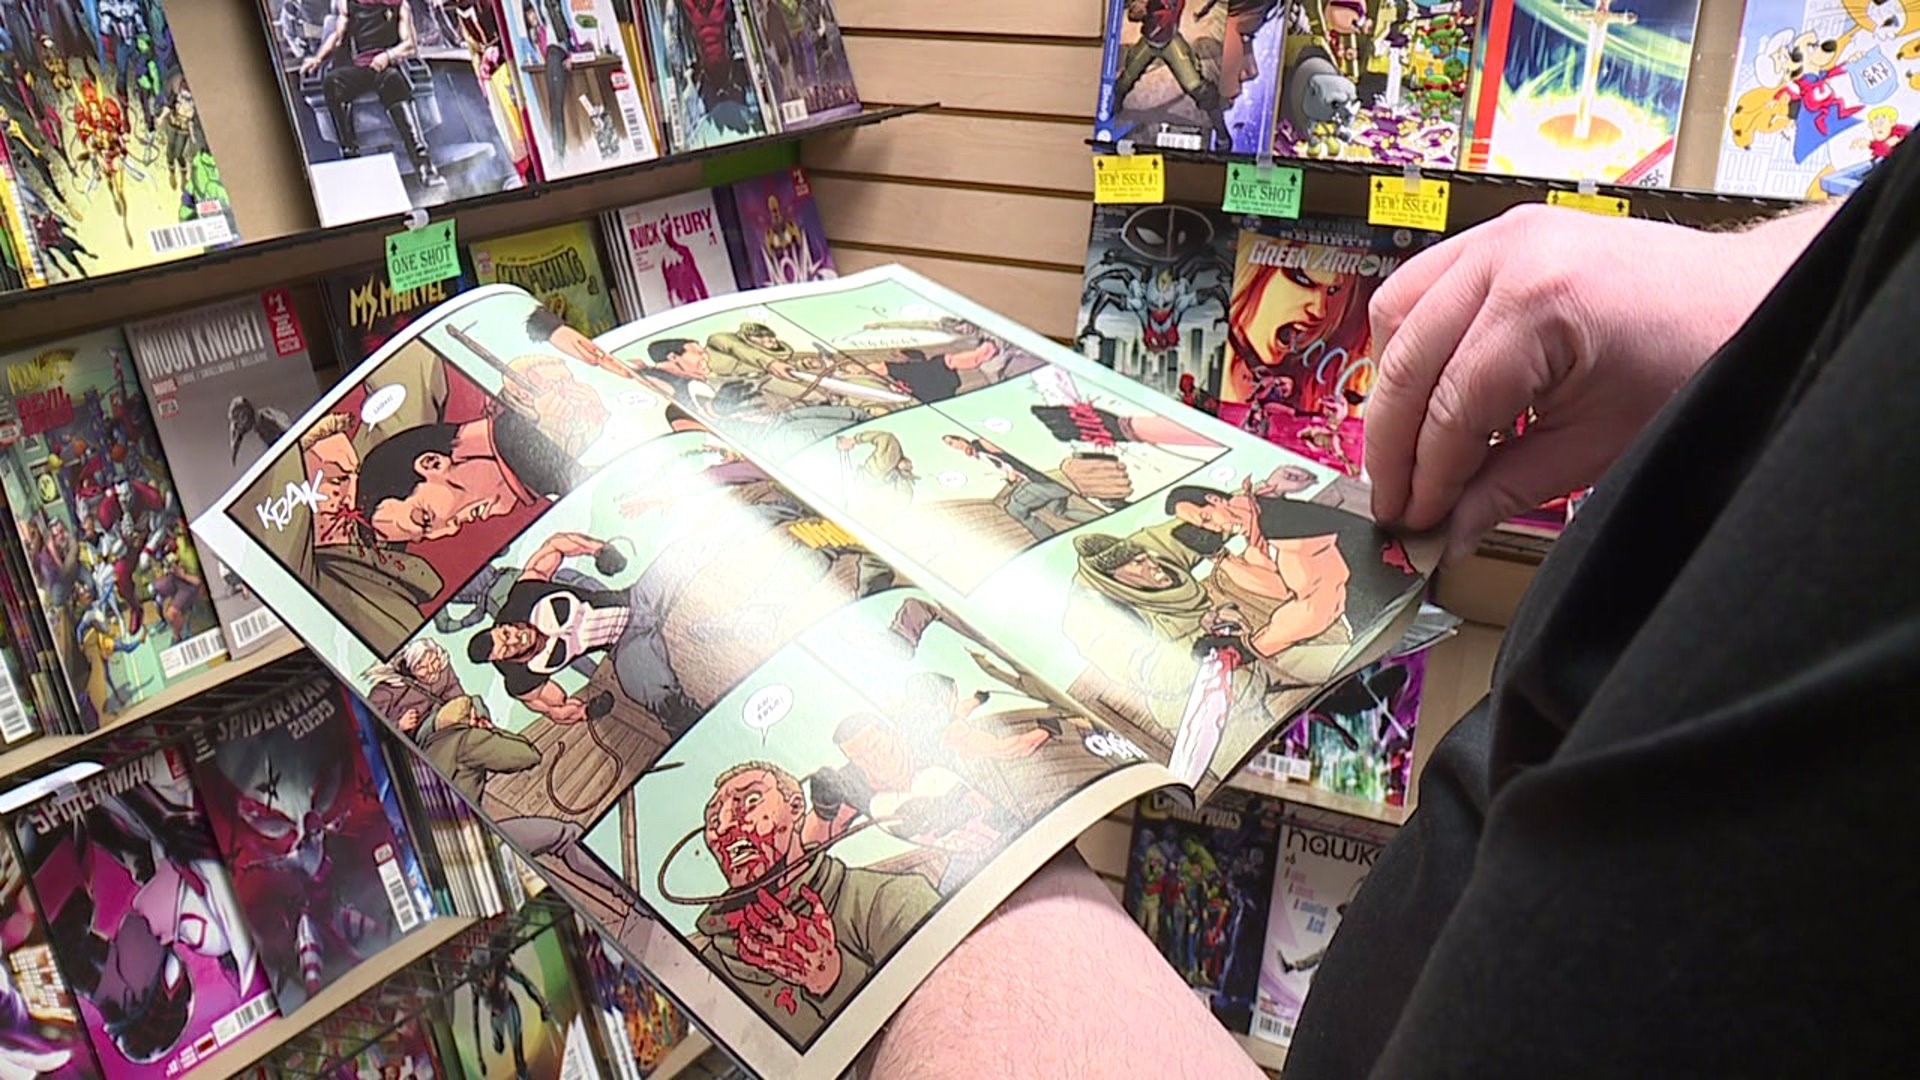 Celebrating Free Comic Book Day in Luzerne County